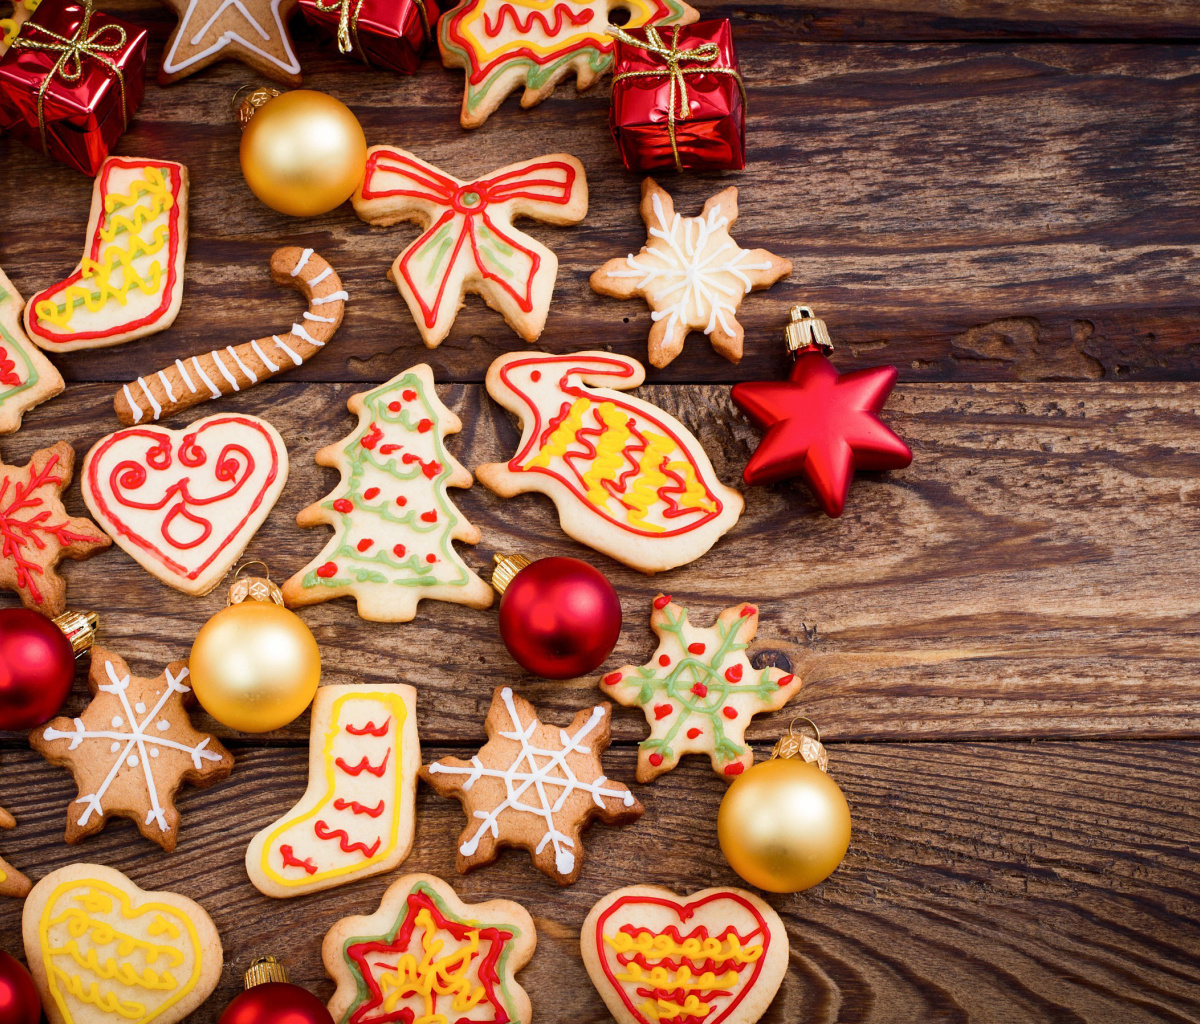 Christmas Decorations Cookies and Balls wallpaper 1200x1024